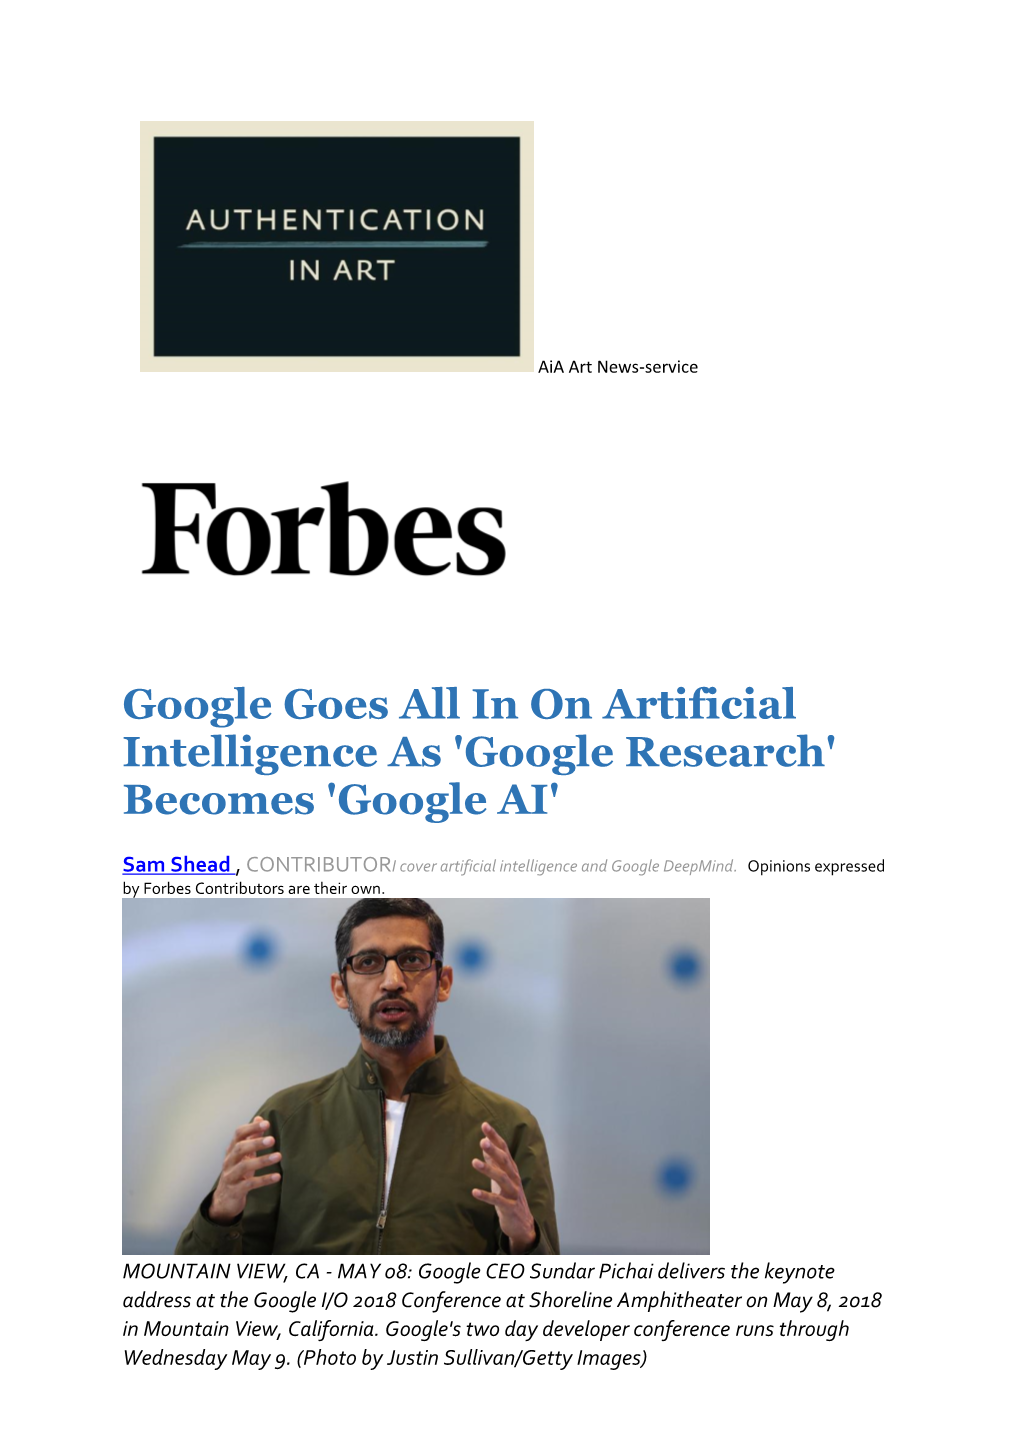 Google Goes All in on Artificial Intelligence As 'Google Research' Becomes 'Google AI'